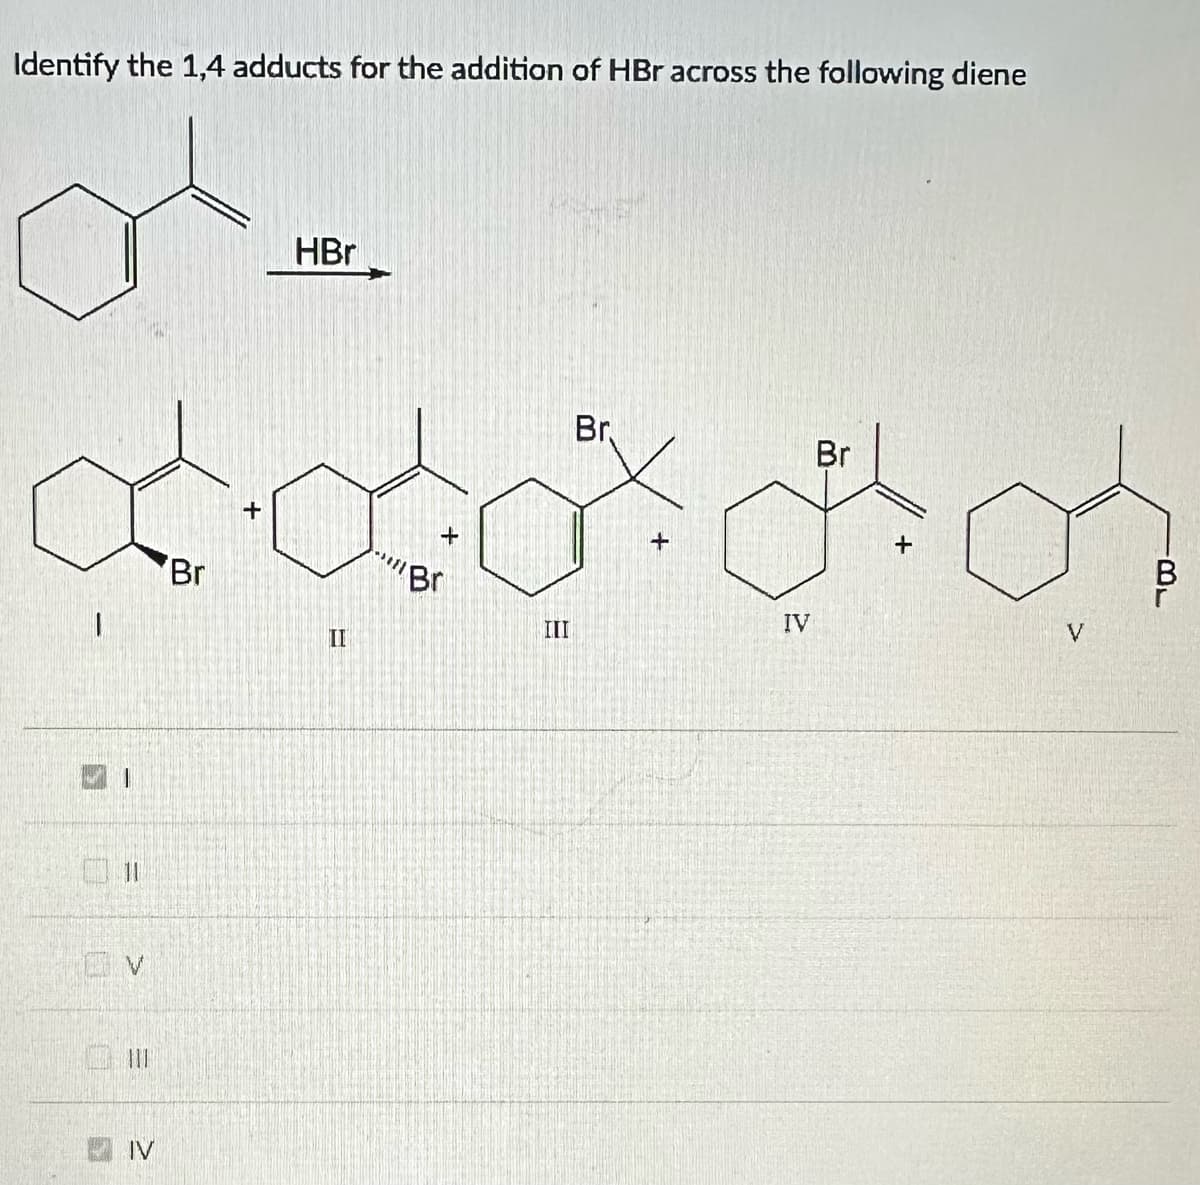 Identify the 1,4 adducts for the addition of HBr across the following diene
a...
HBr
Br.
ddddd
+
III
11
GV
=
IV
Br
II
*****
Br
IV
Br
+
V
B